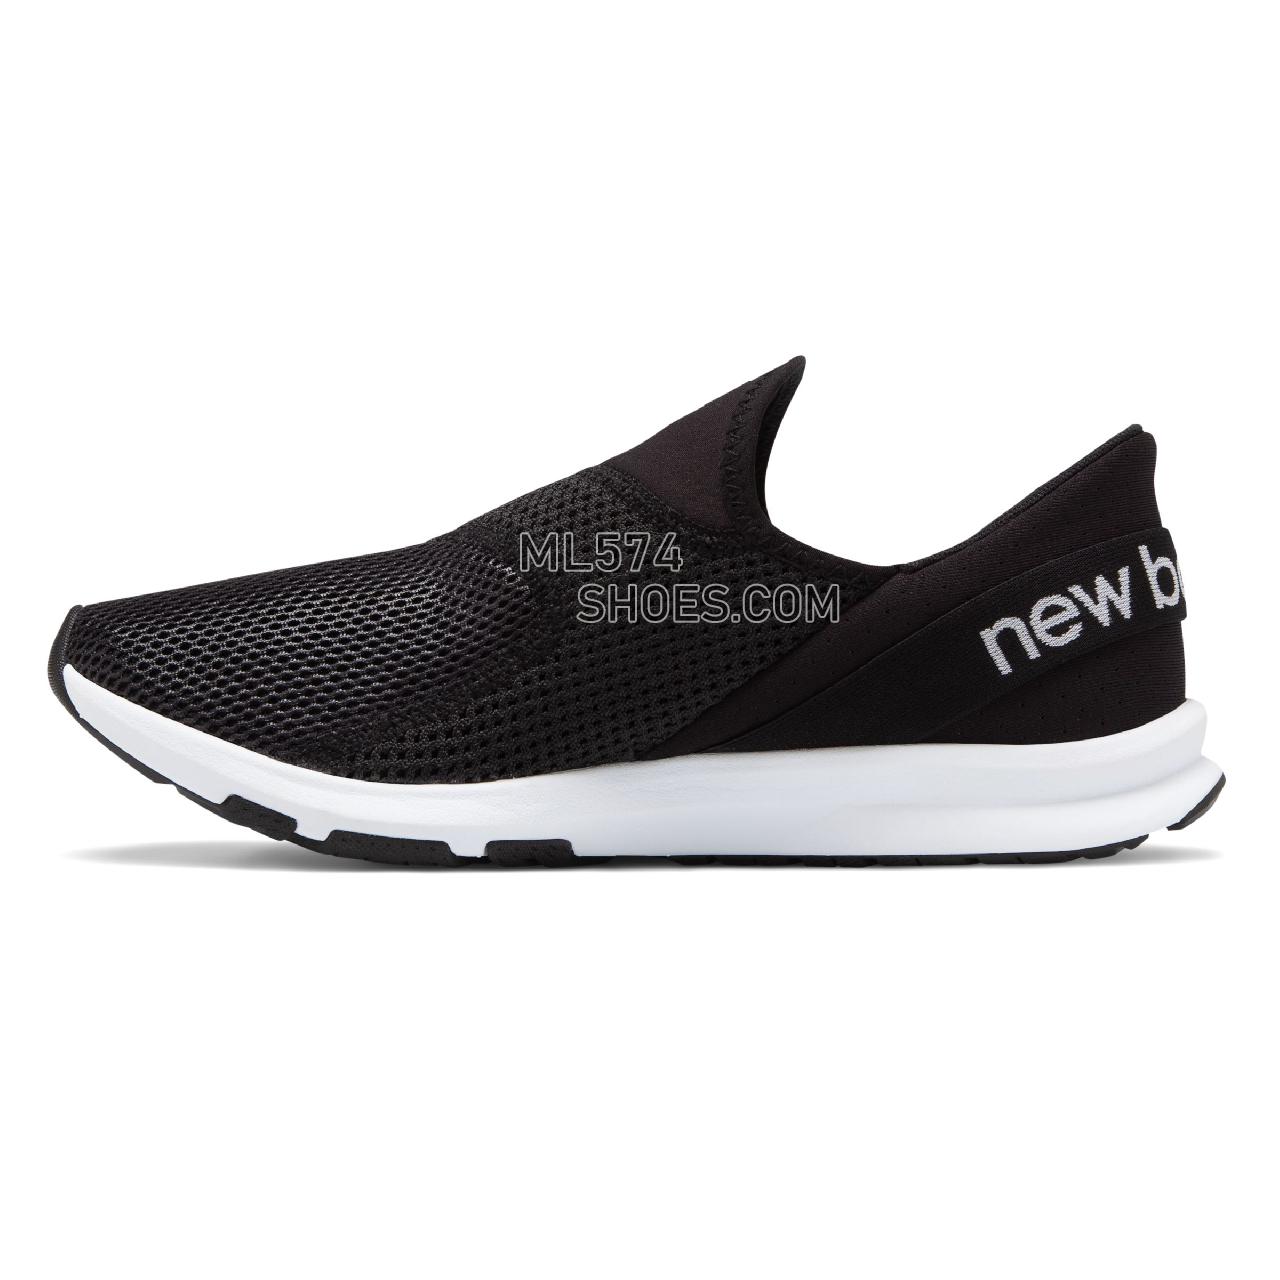 New Balance FuelCore Nergize Easy Slip-On - Women's Sport Style Sneakers - Black with White - WLNRSLB1